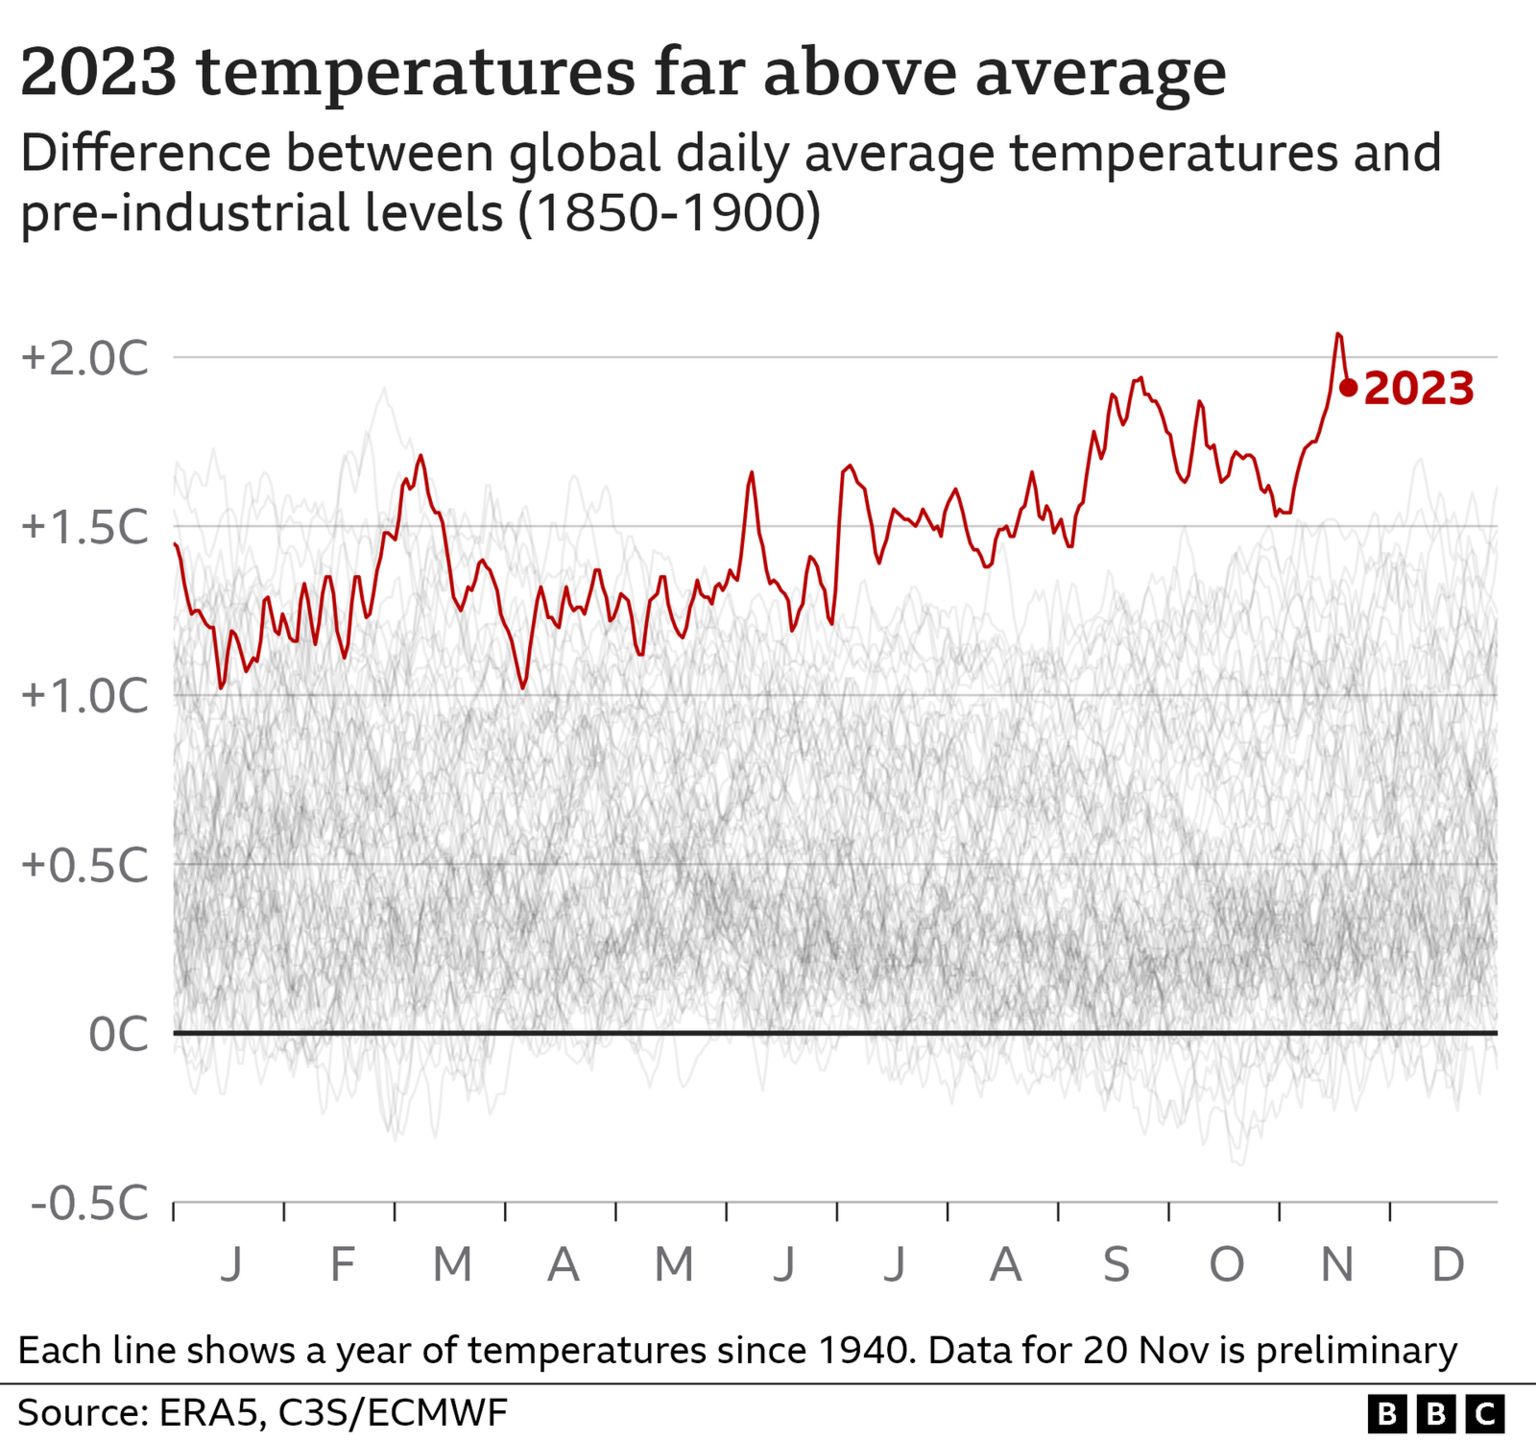 Graph showing global temperatures in 2023 compared to average